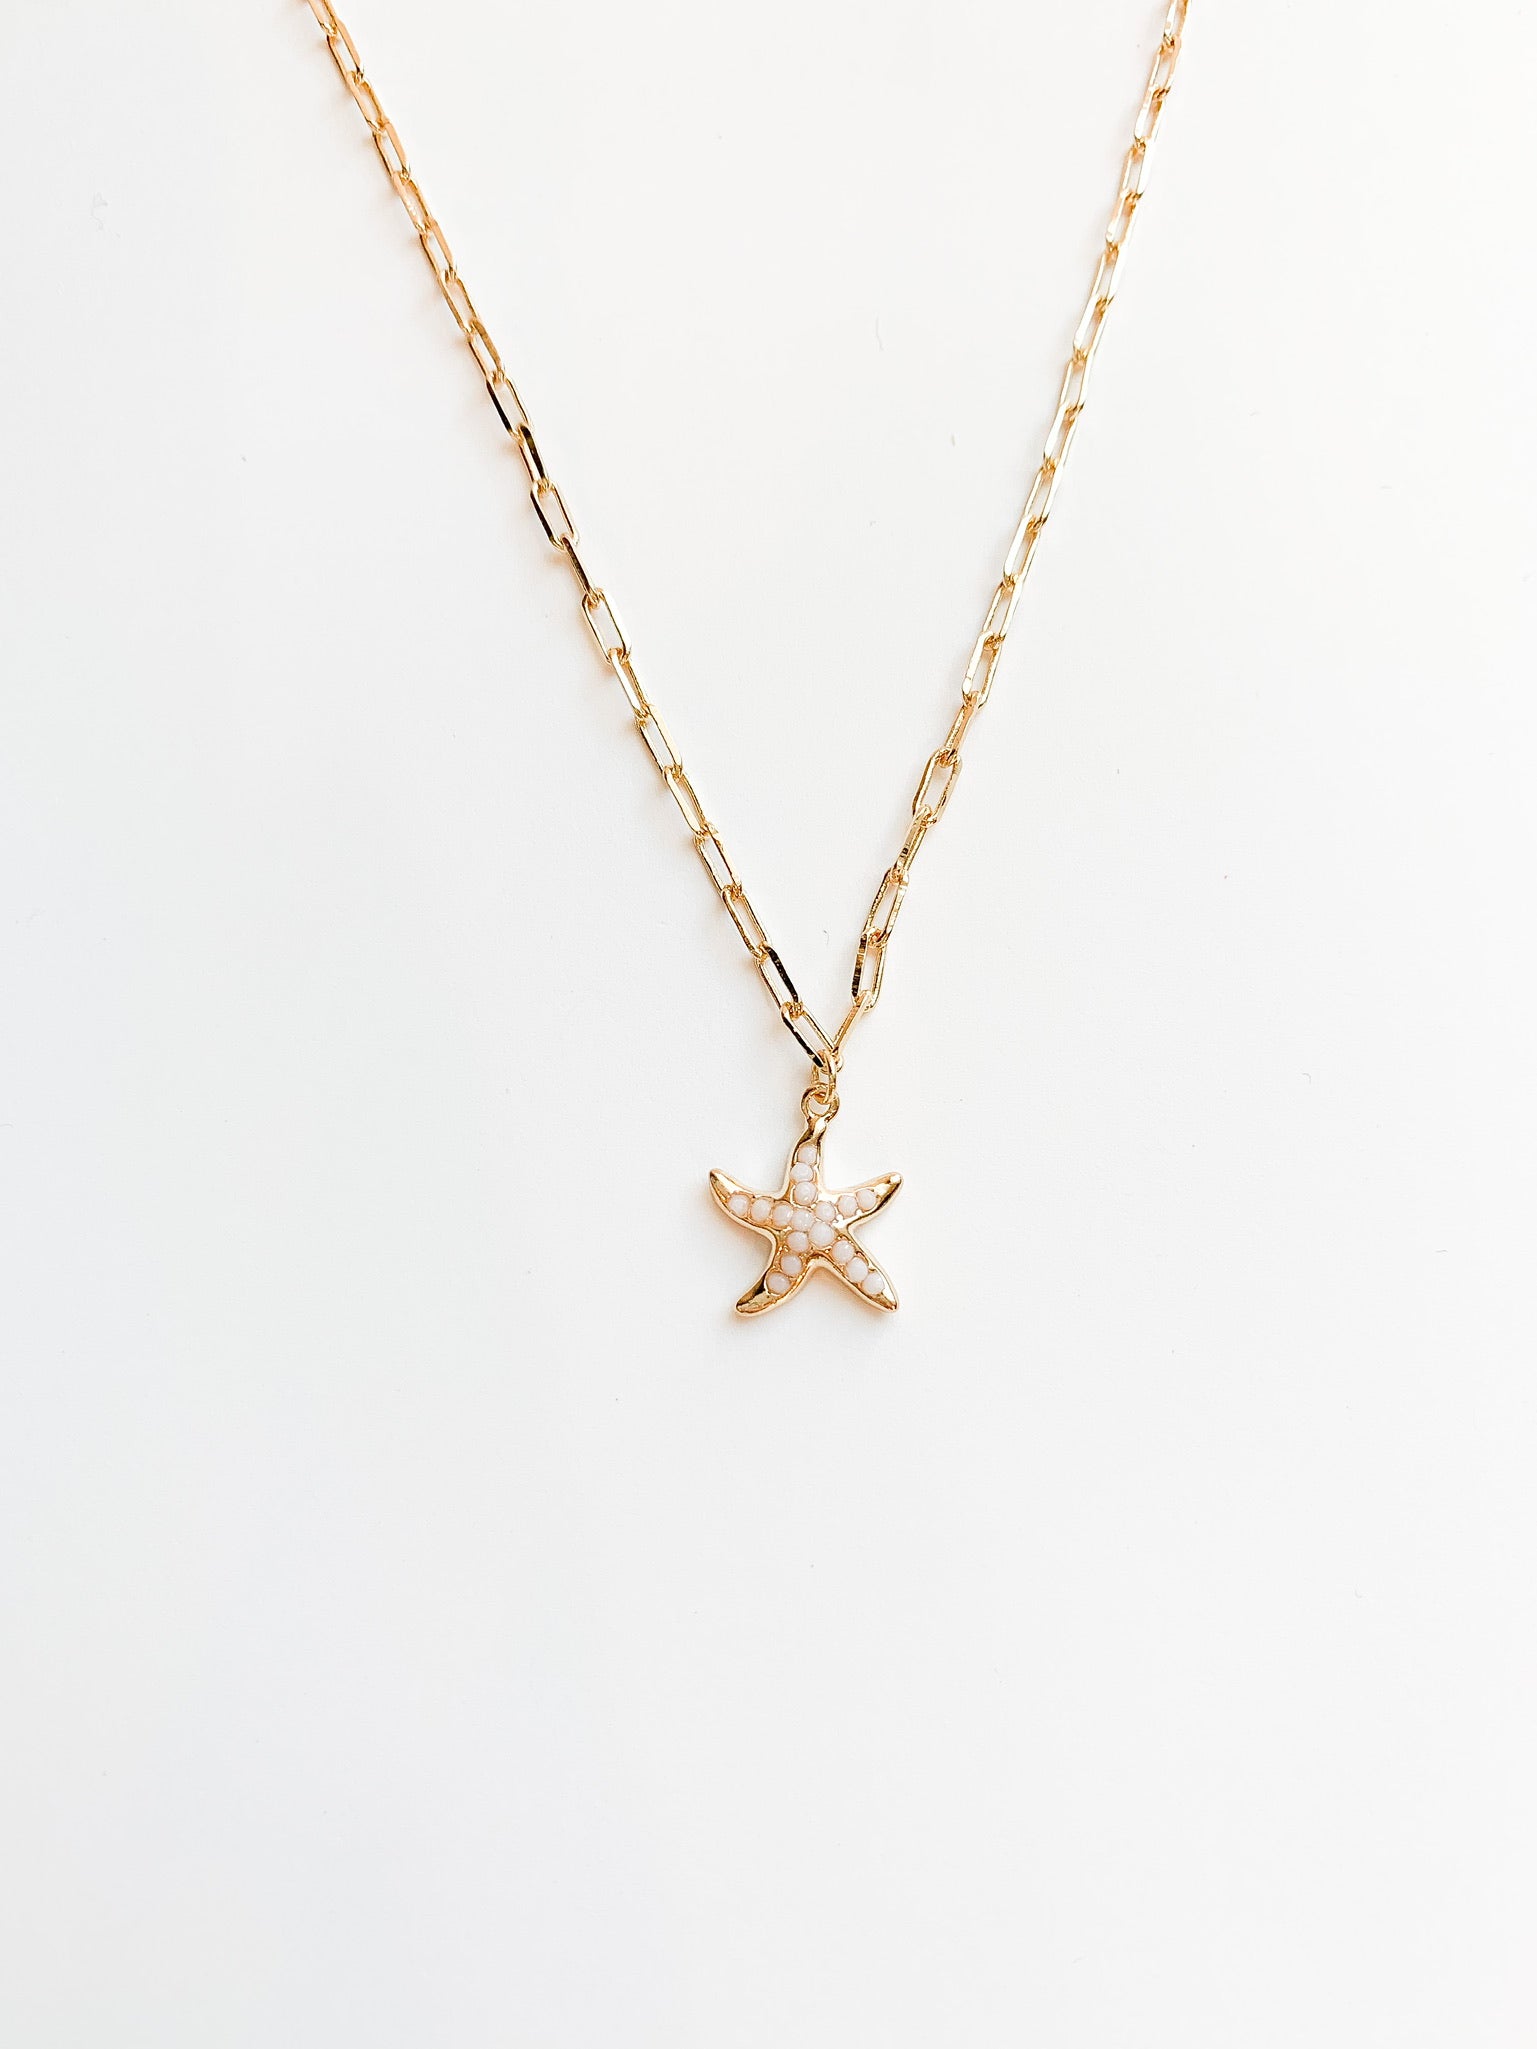 Jordan simple starfish necklace in white with gold